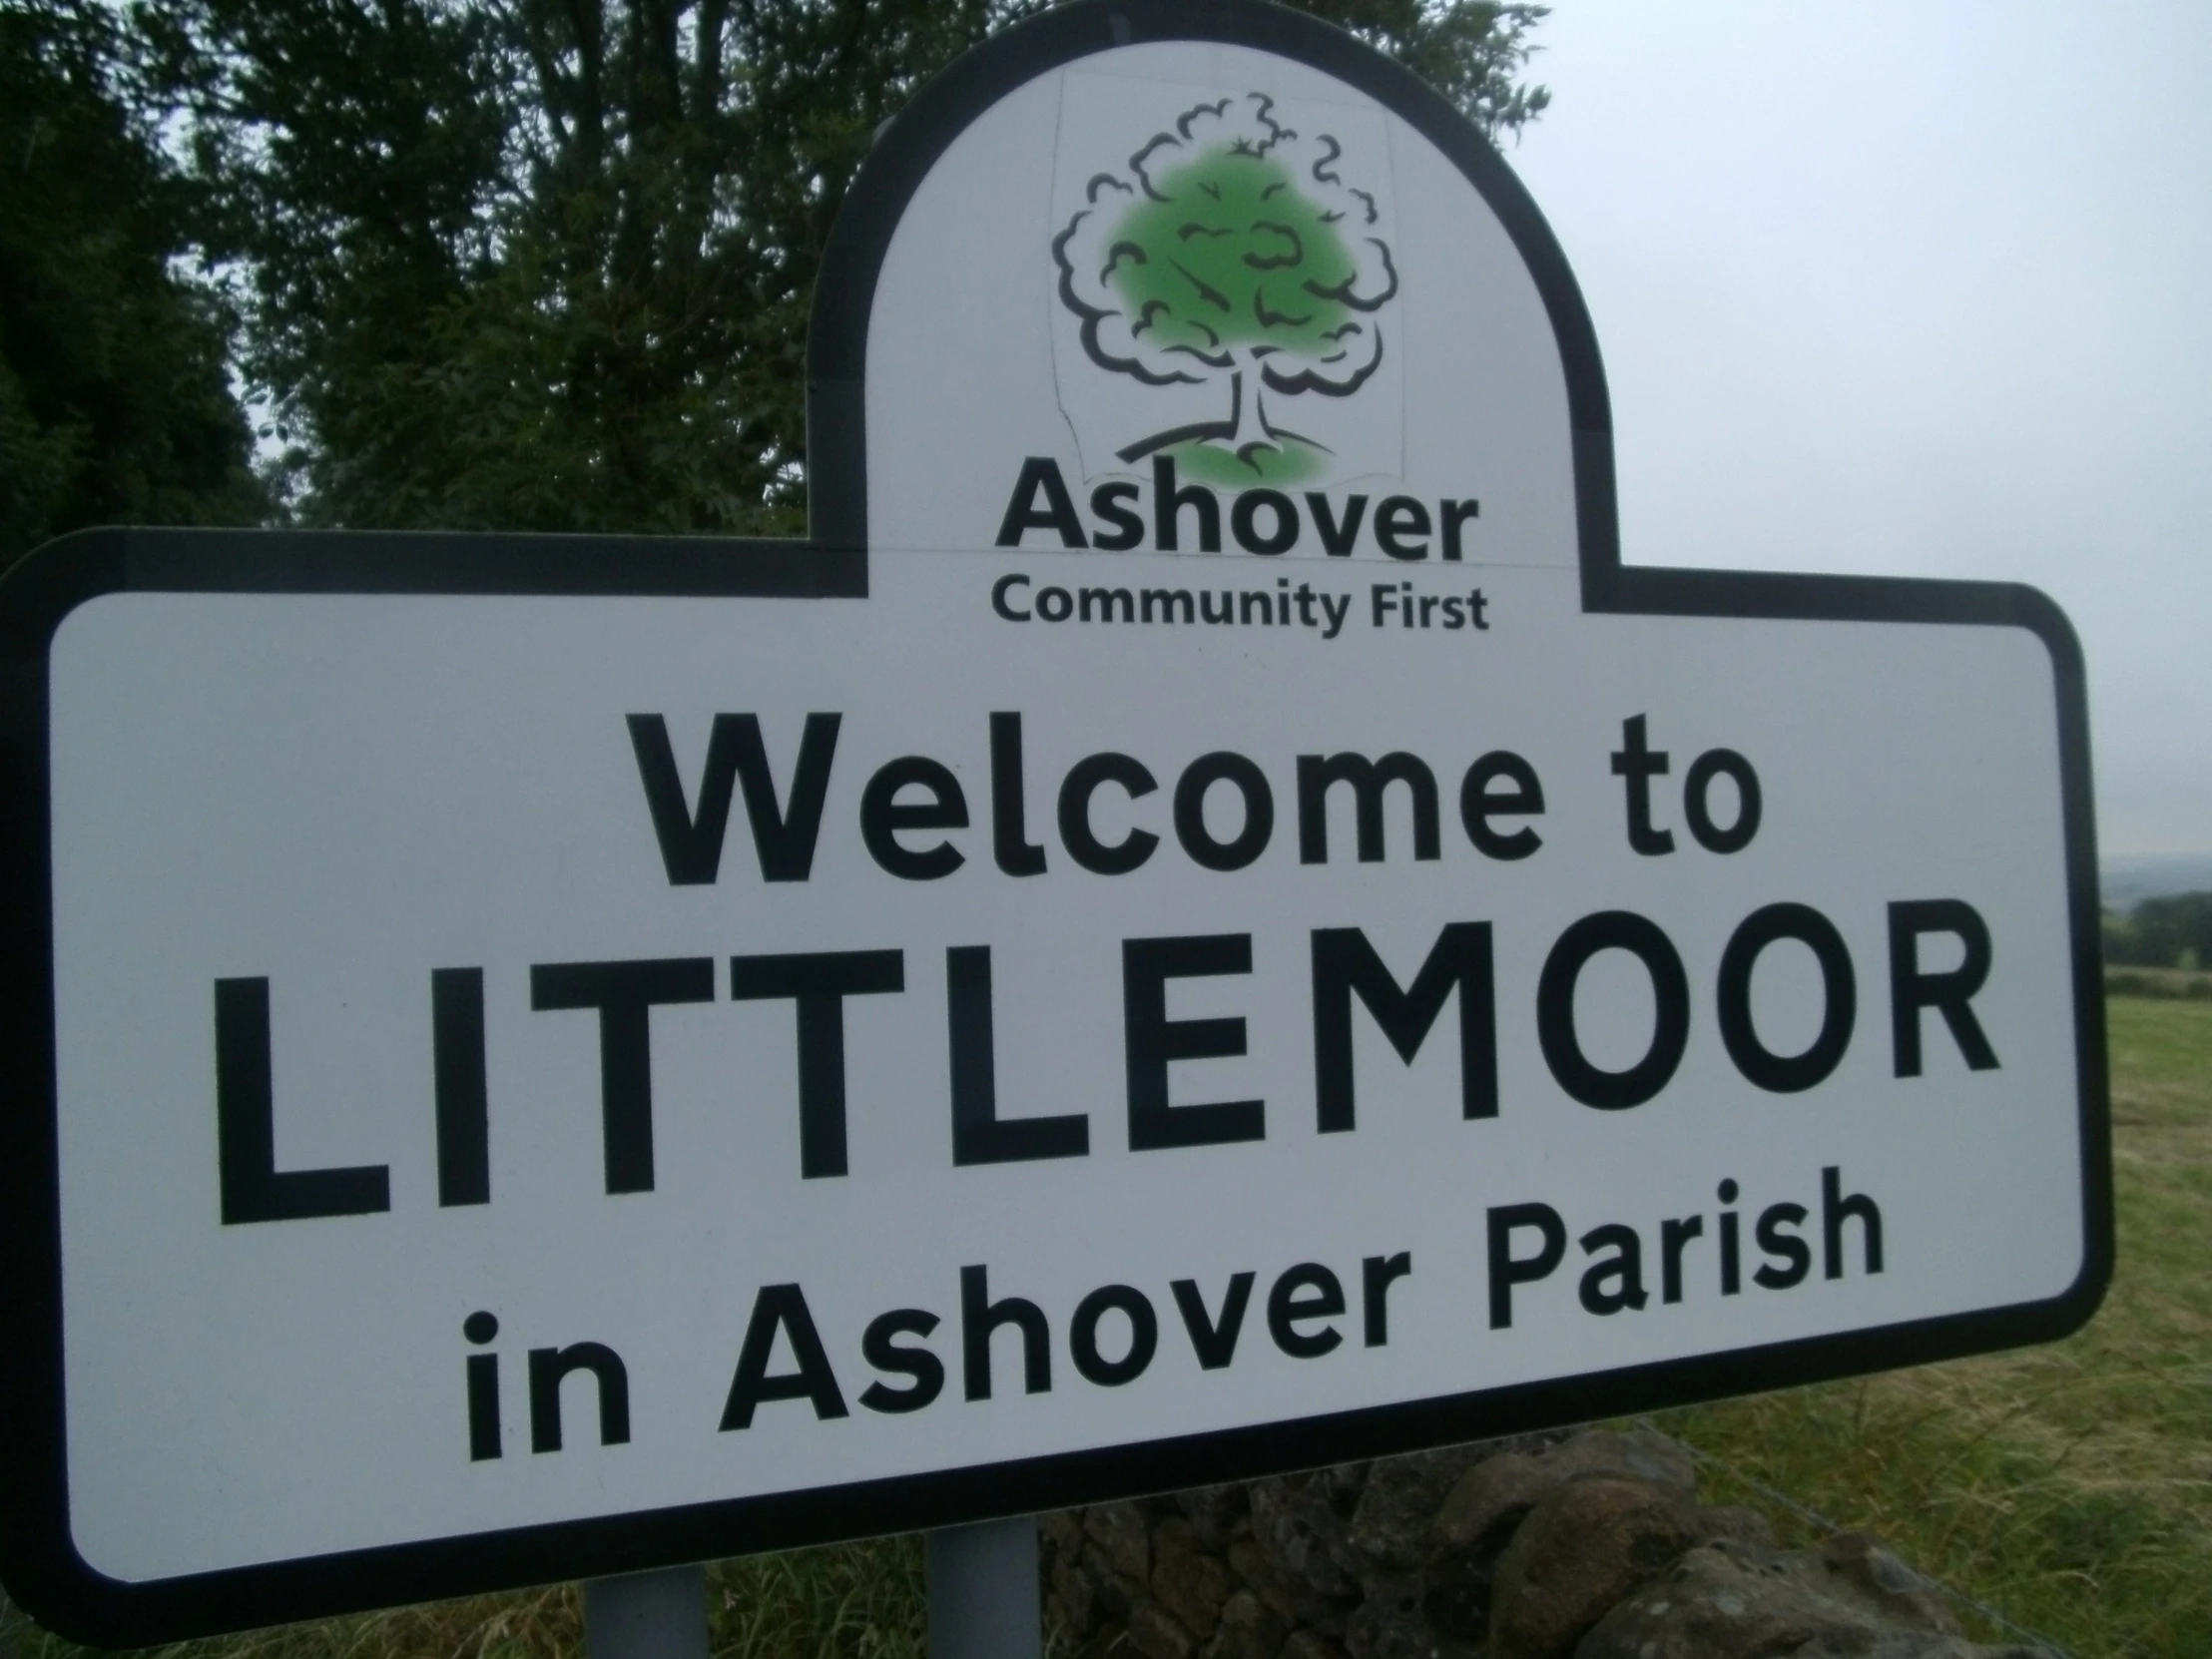 a sign for the welcome to a littlemooor in ashover park